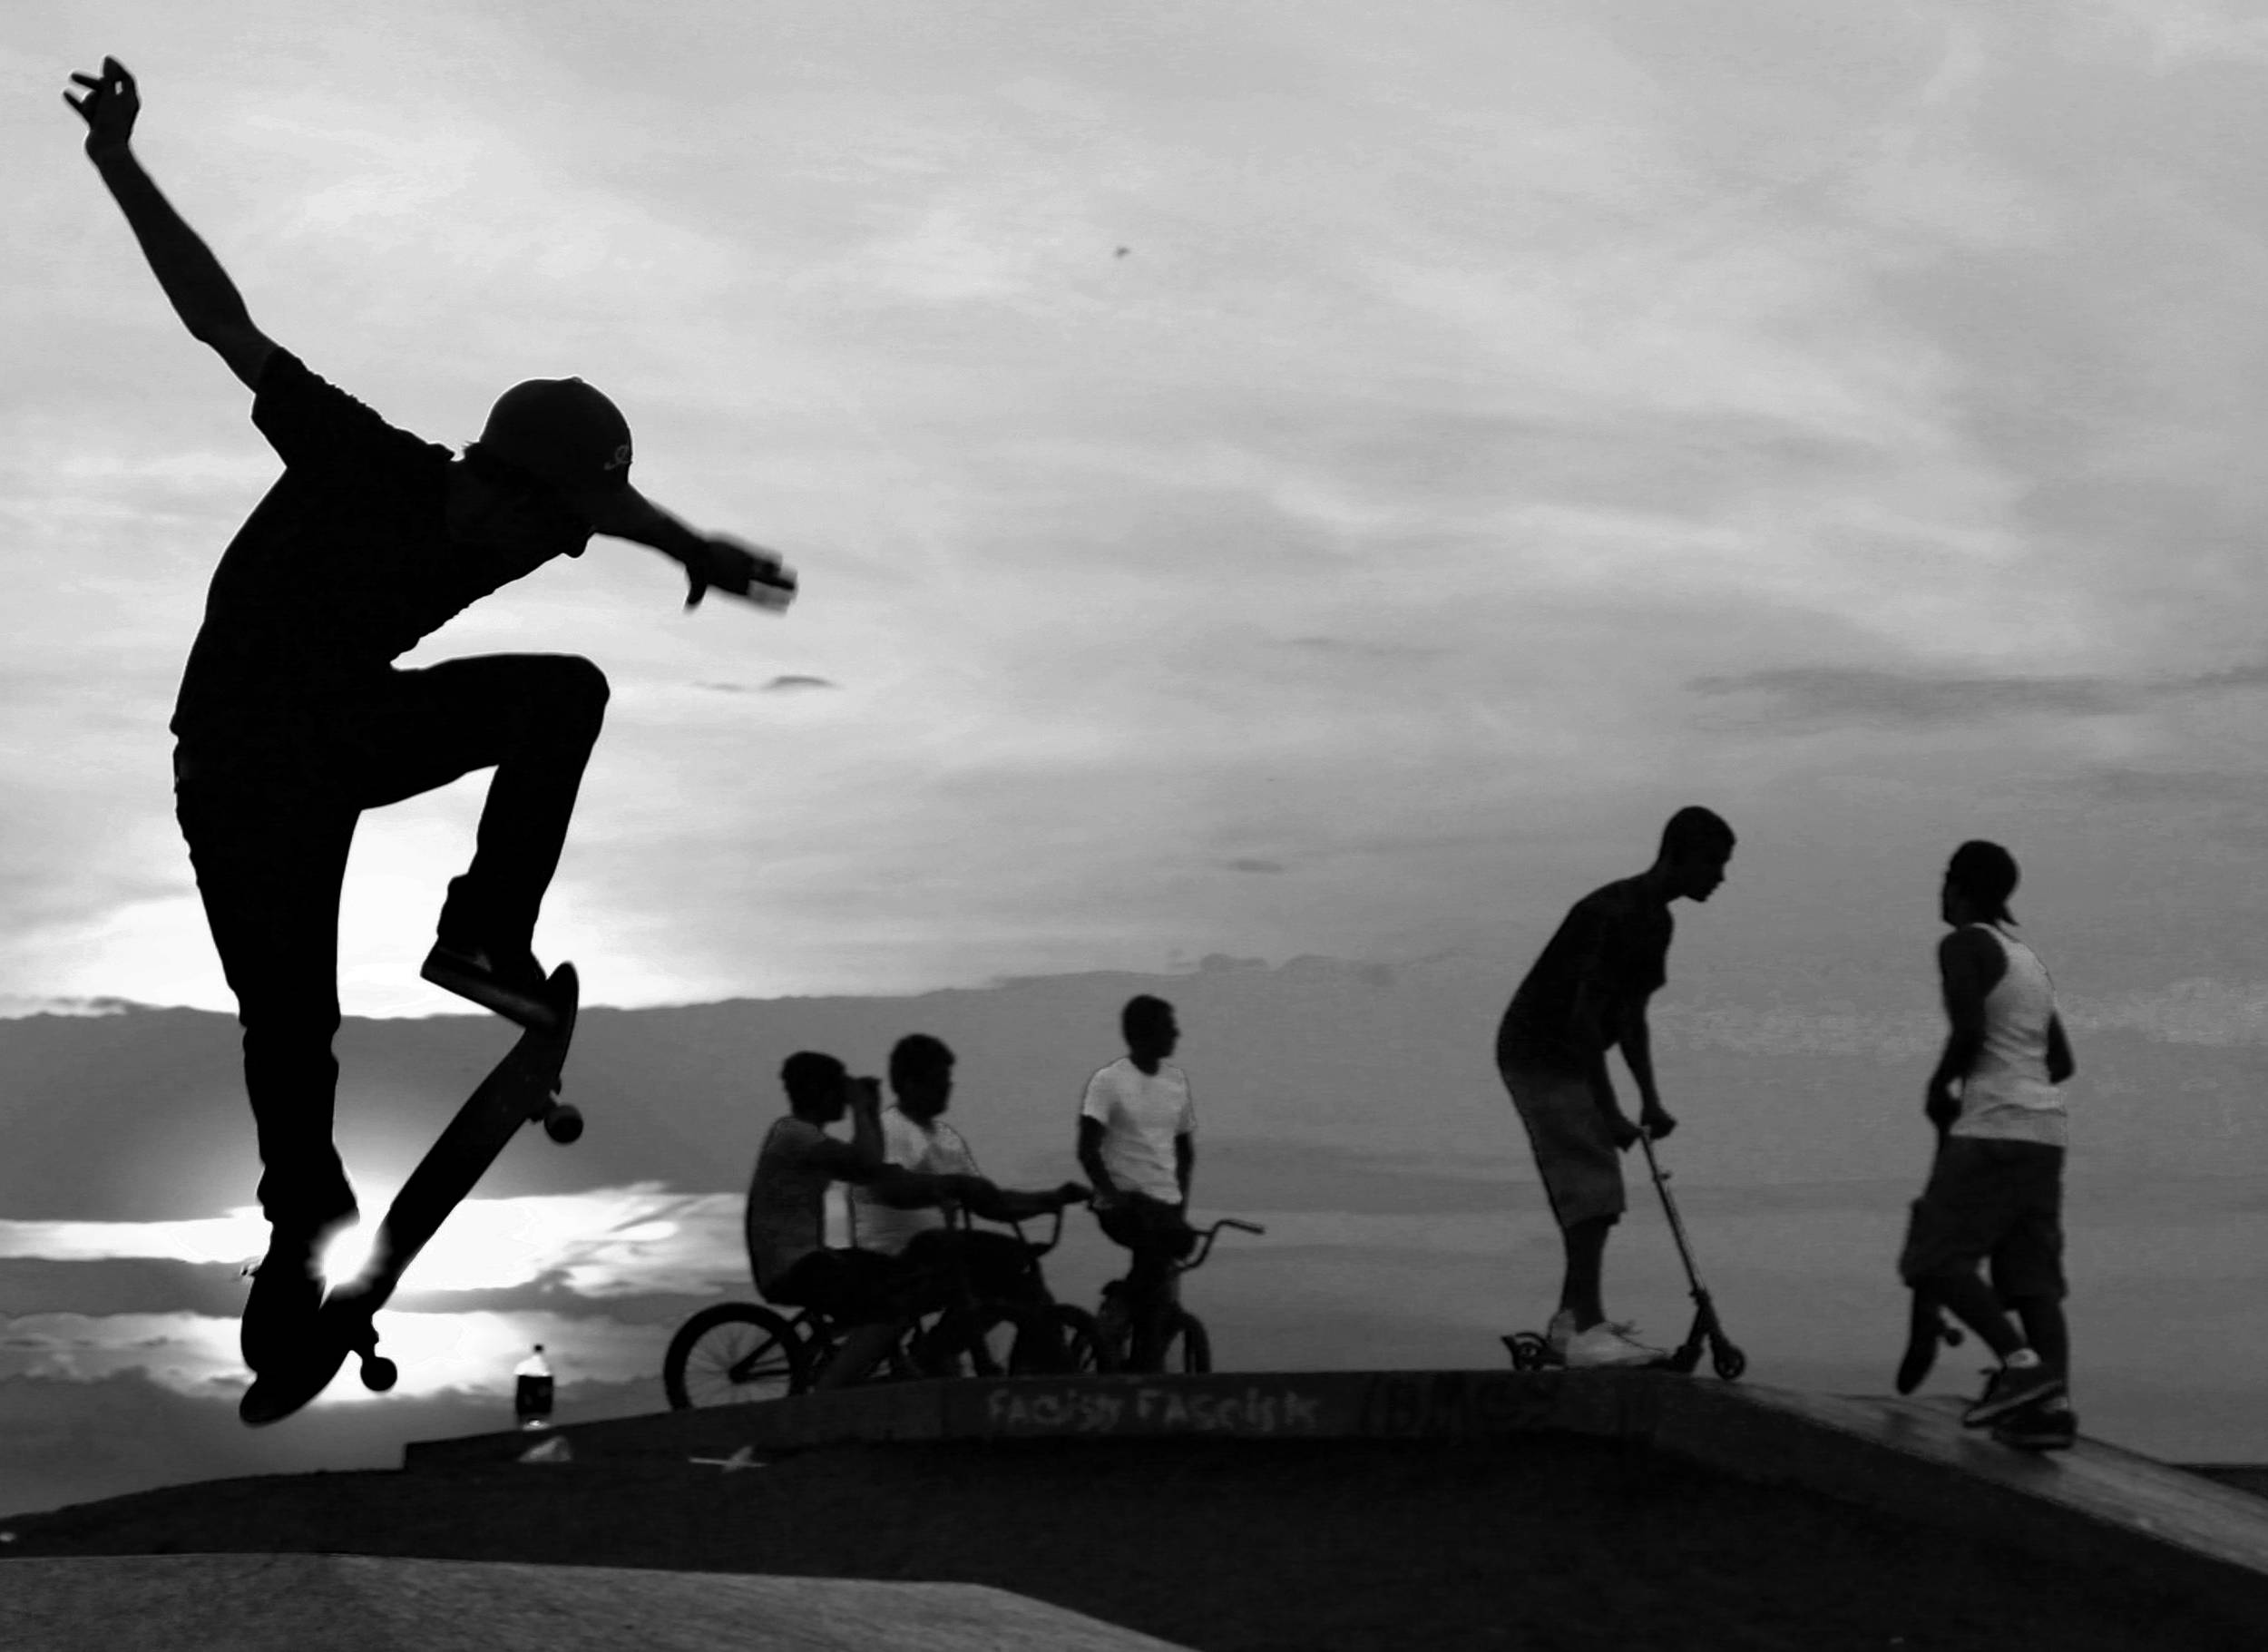 Skating into the sunset